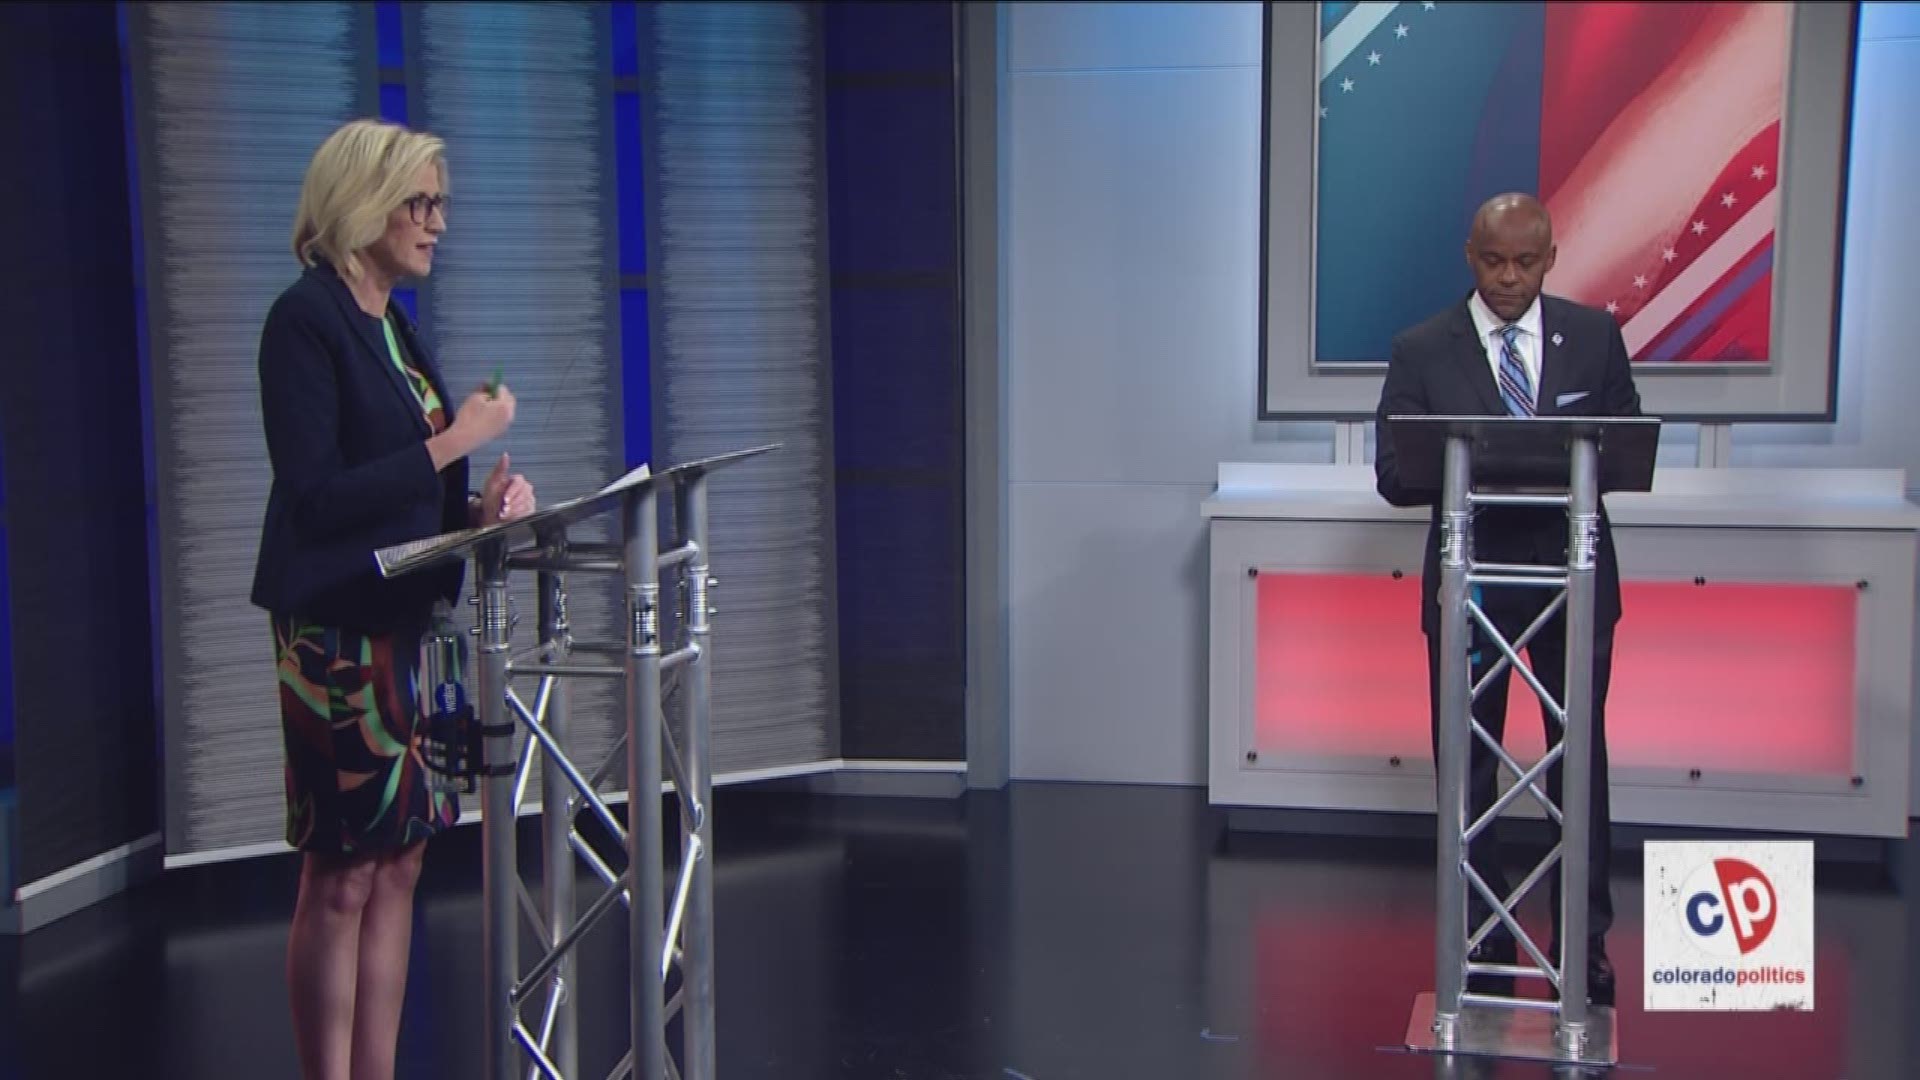 Denver mayoral candidates Michael Hancock and Jamie Giellis give their closing statements at the conclusion of a 9NEWS mayoral debate ahead of the June 4 runoff election.